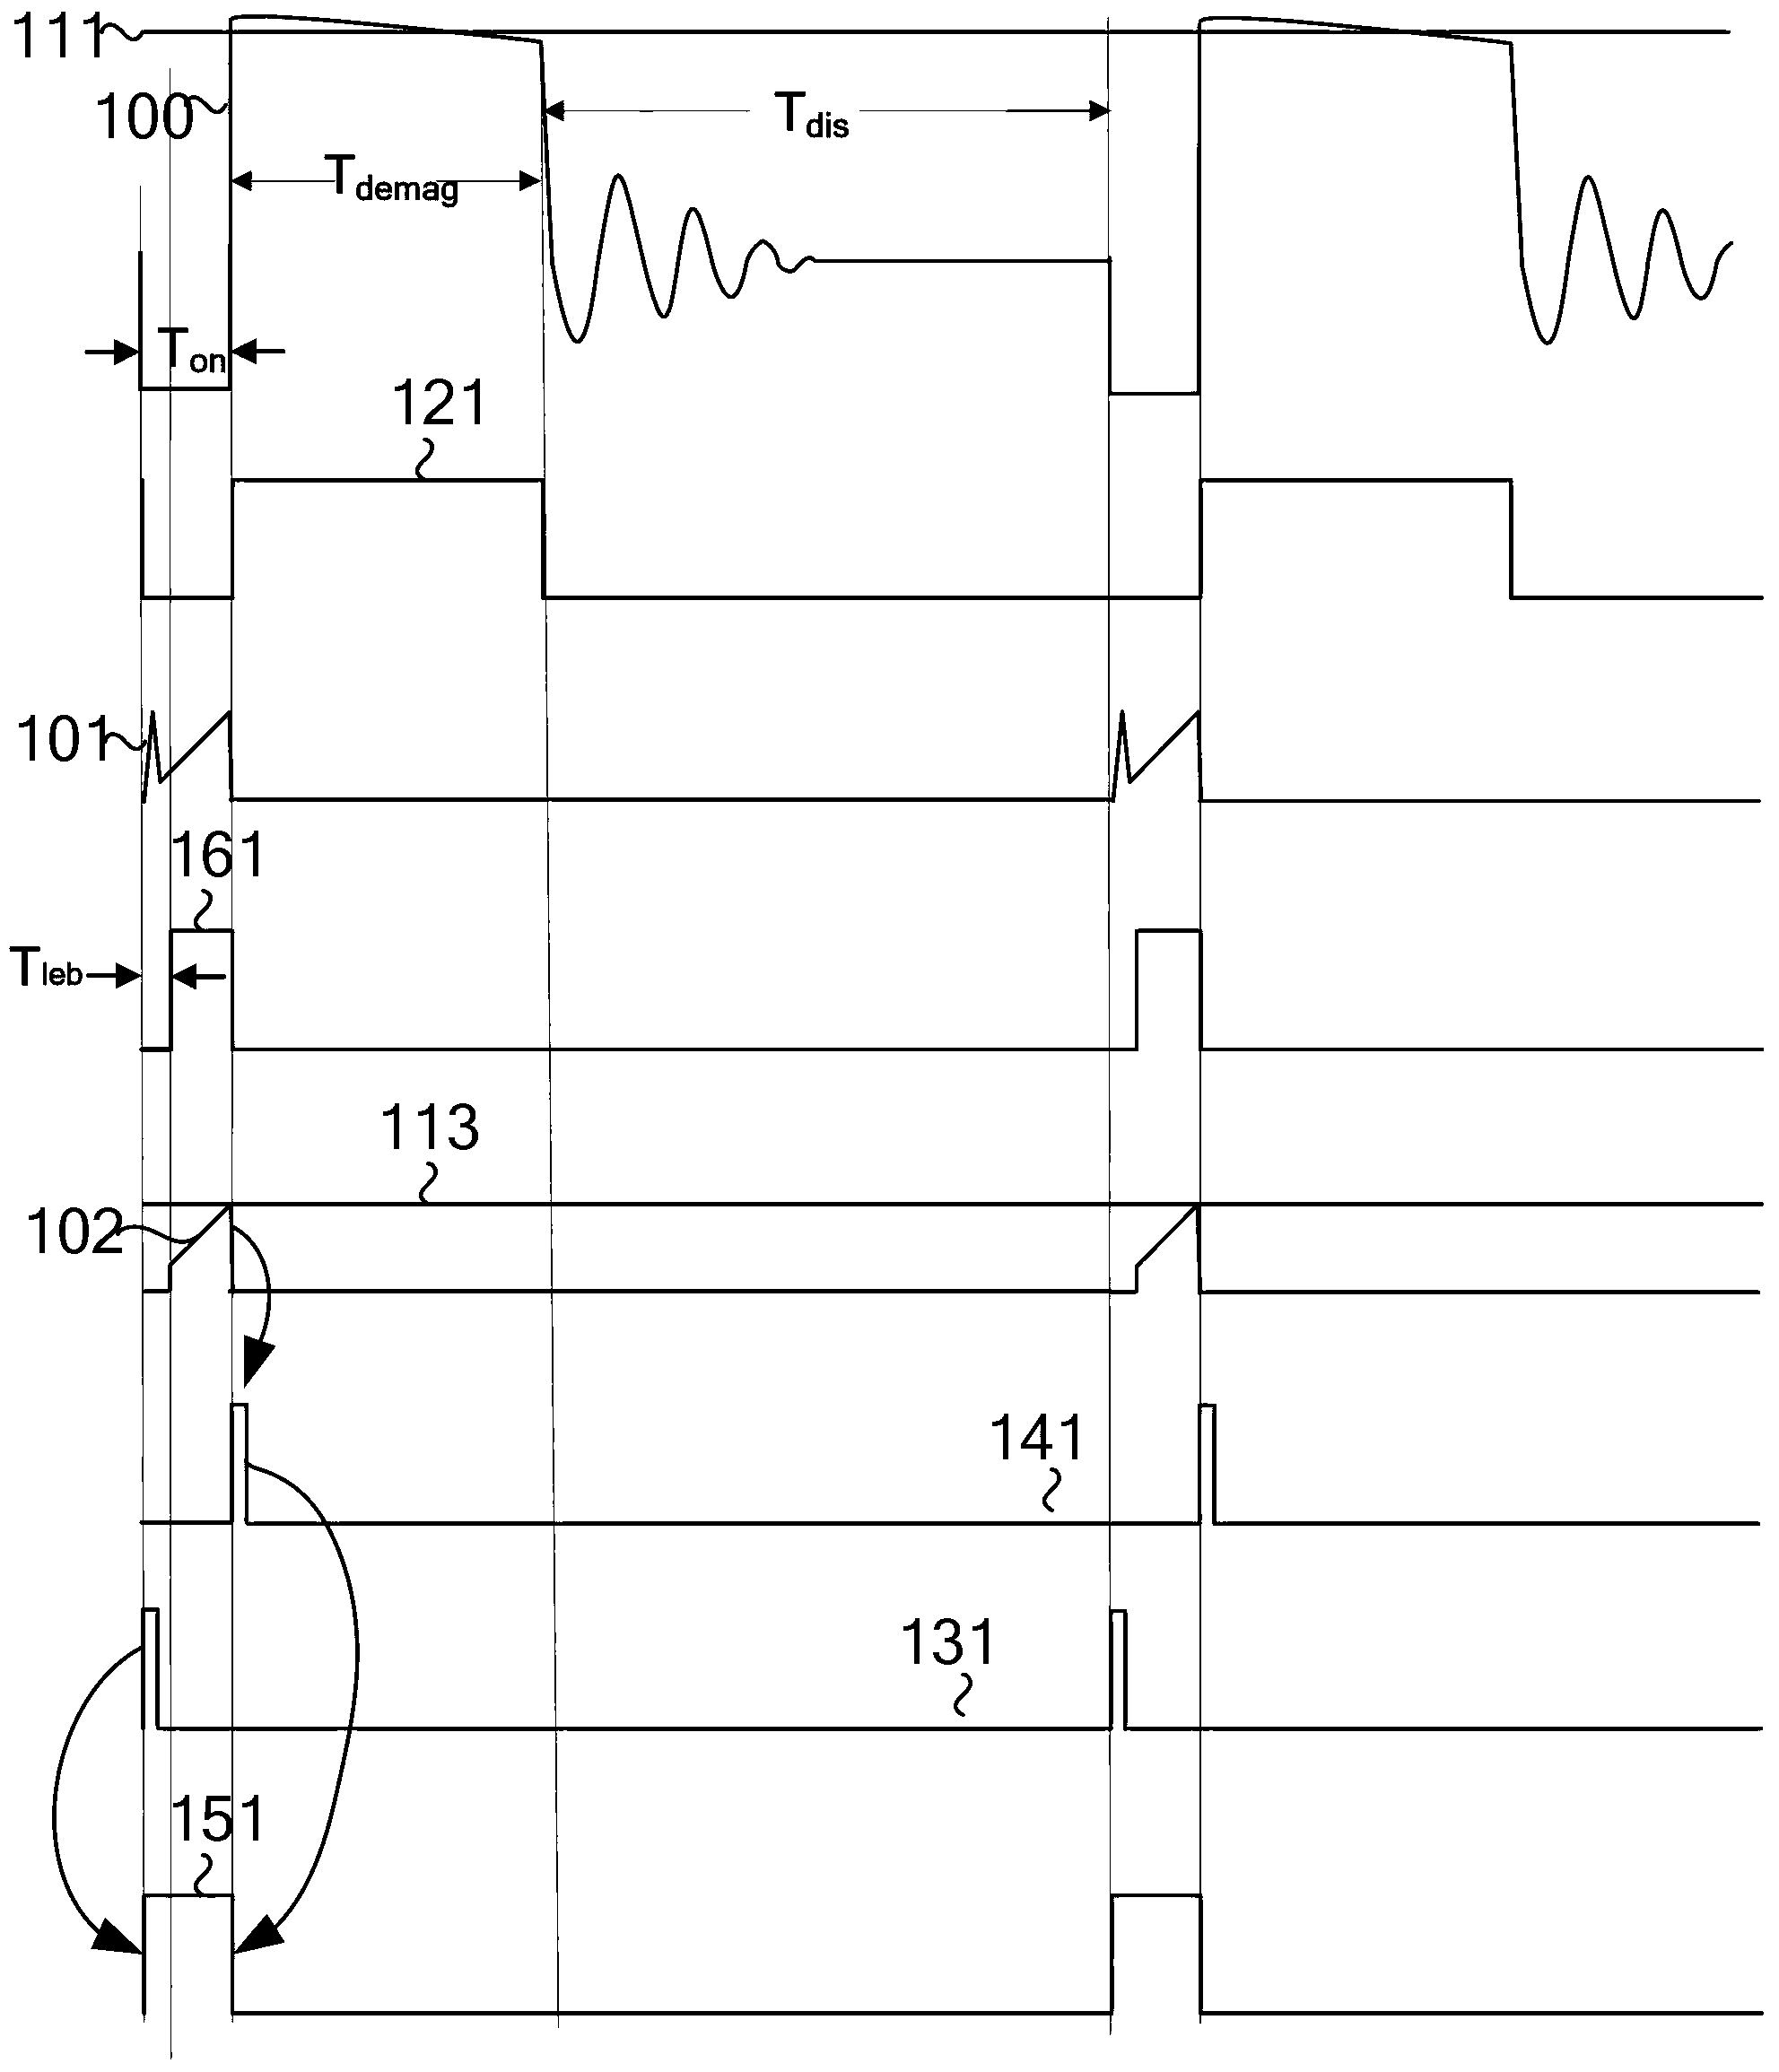 Constant-current and constant-voltage fly-back converter based on primary side feedback